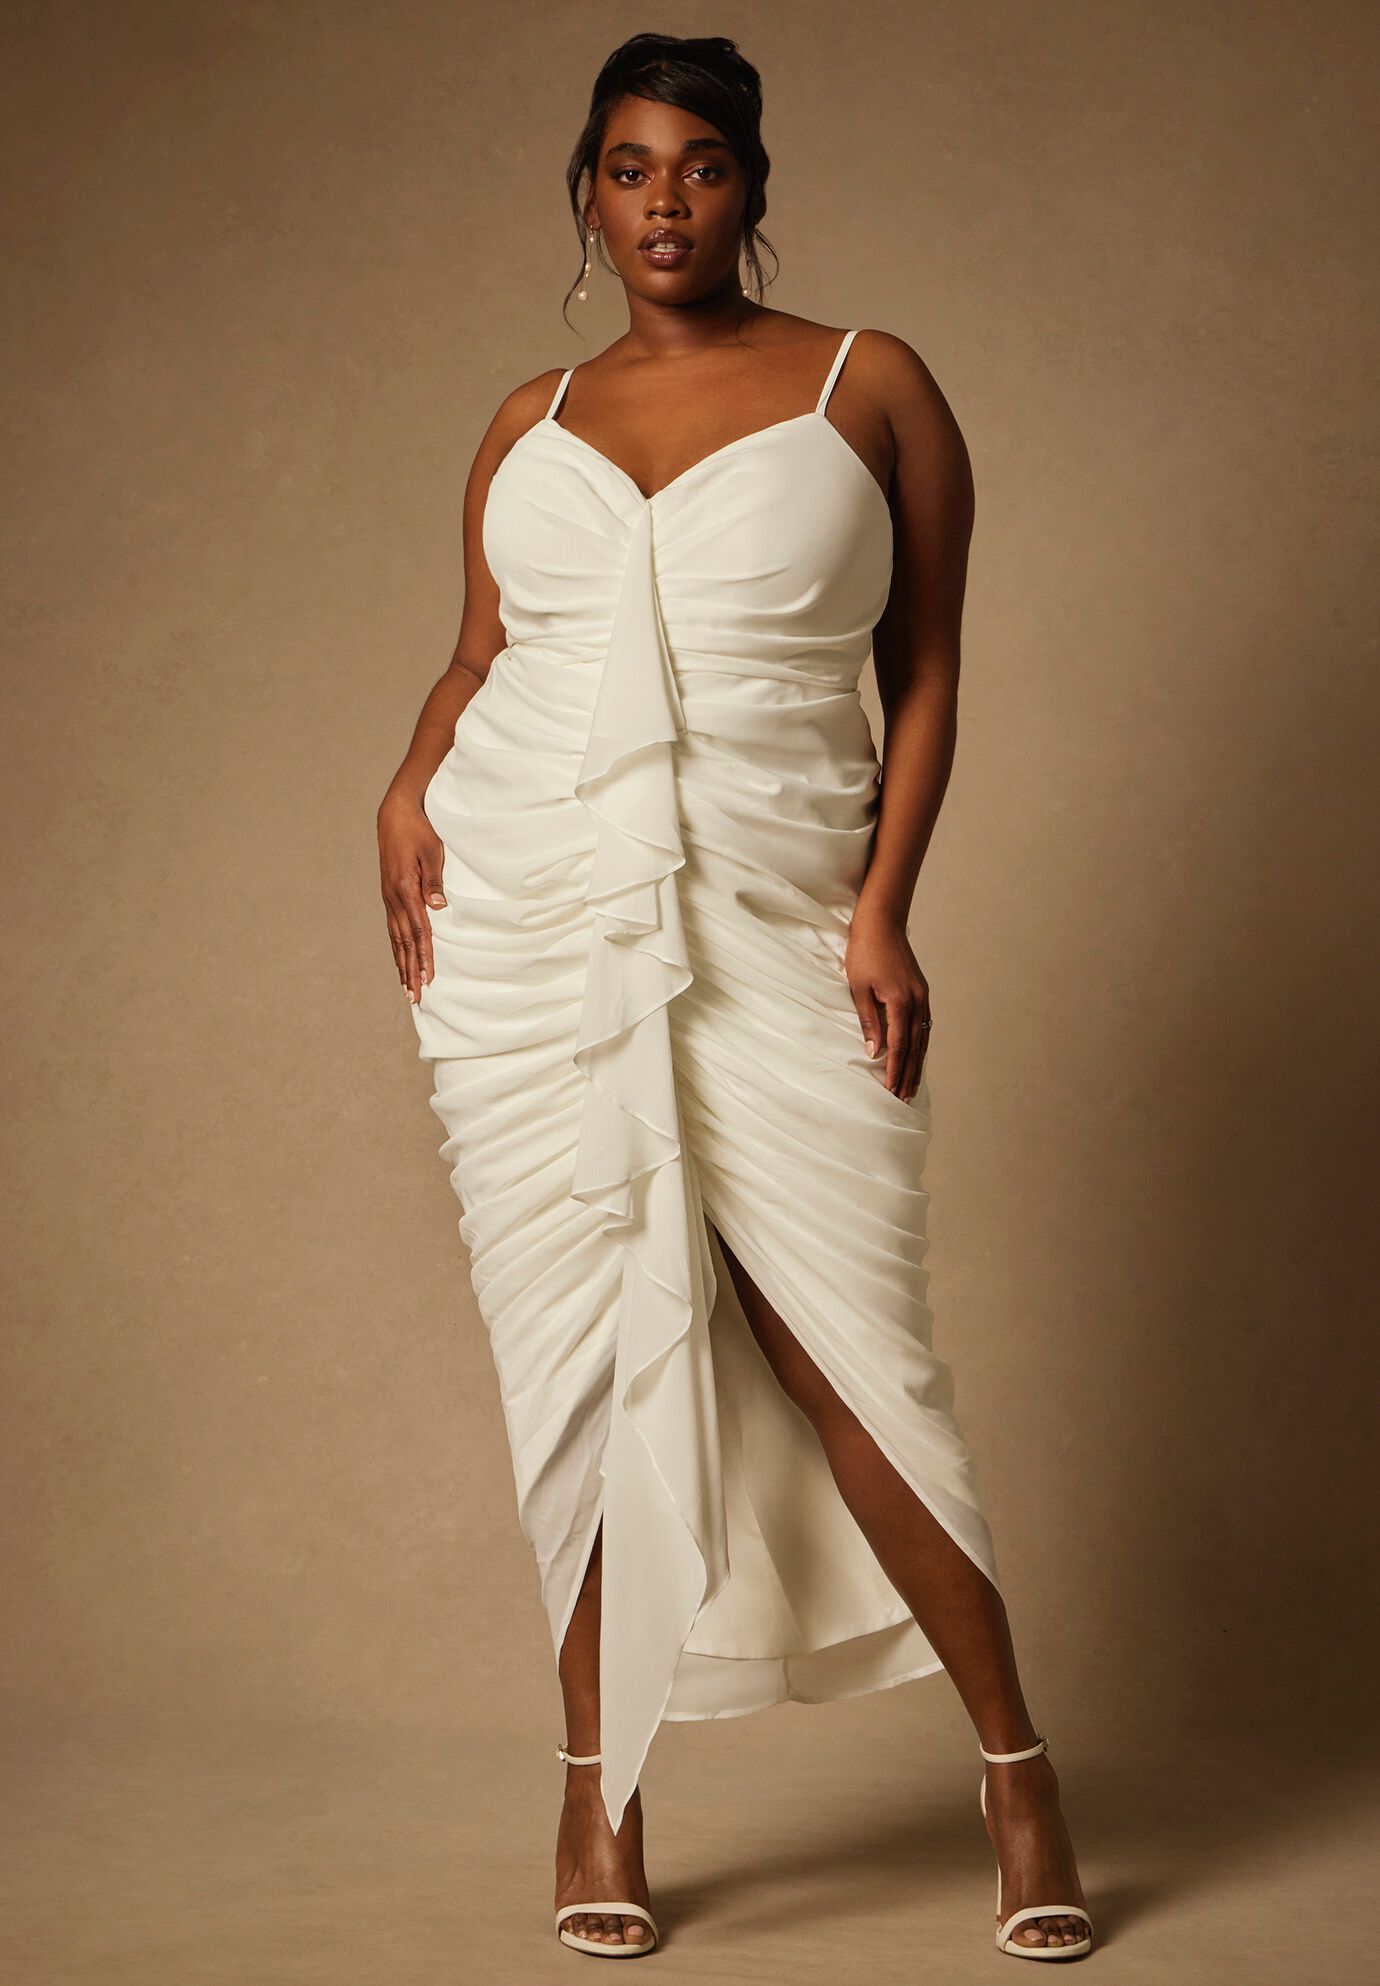 Draped Sweetheart Wedding Dress With Pearls by Eloquii